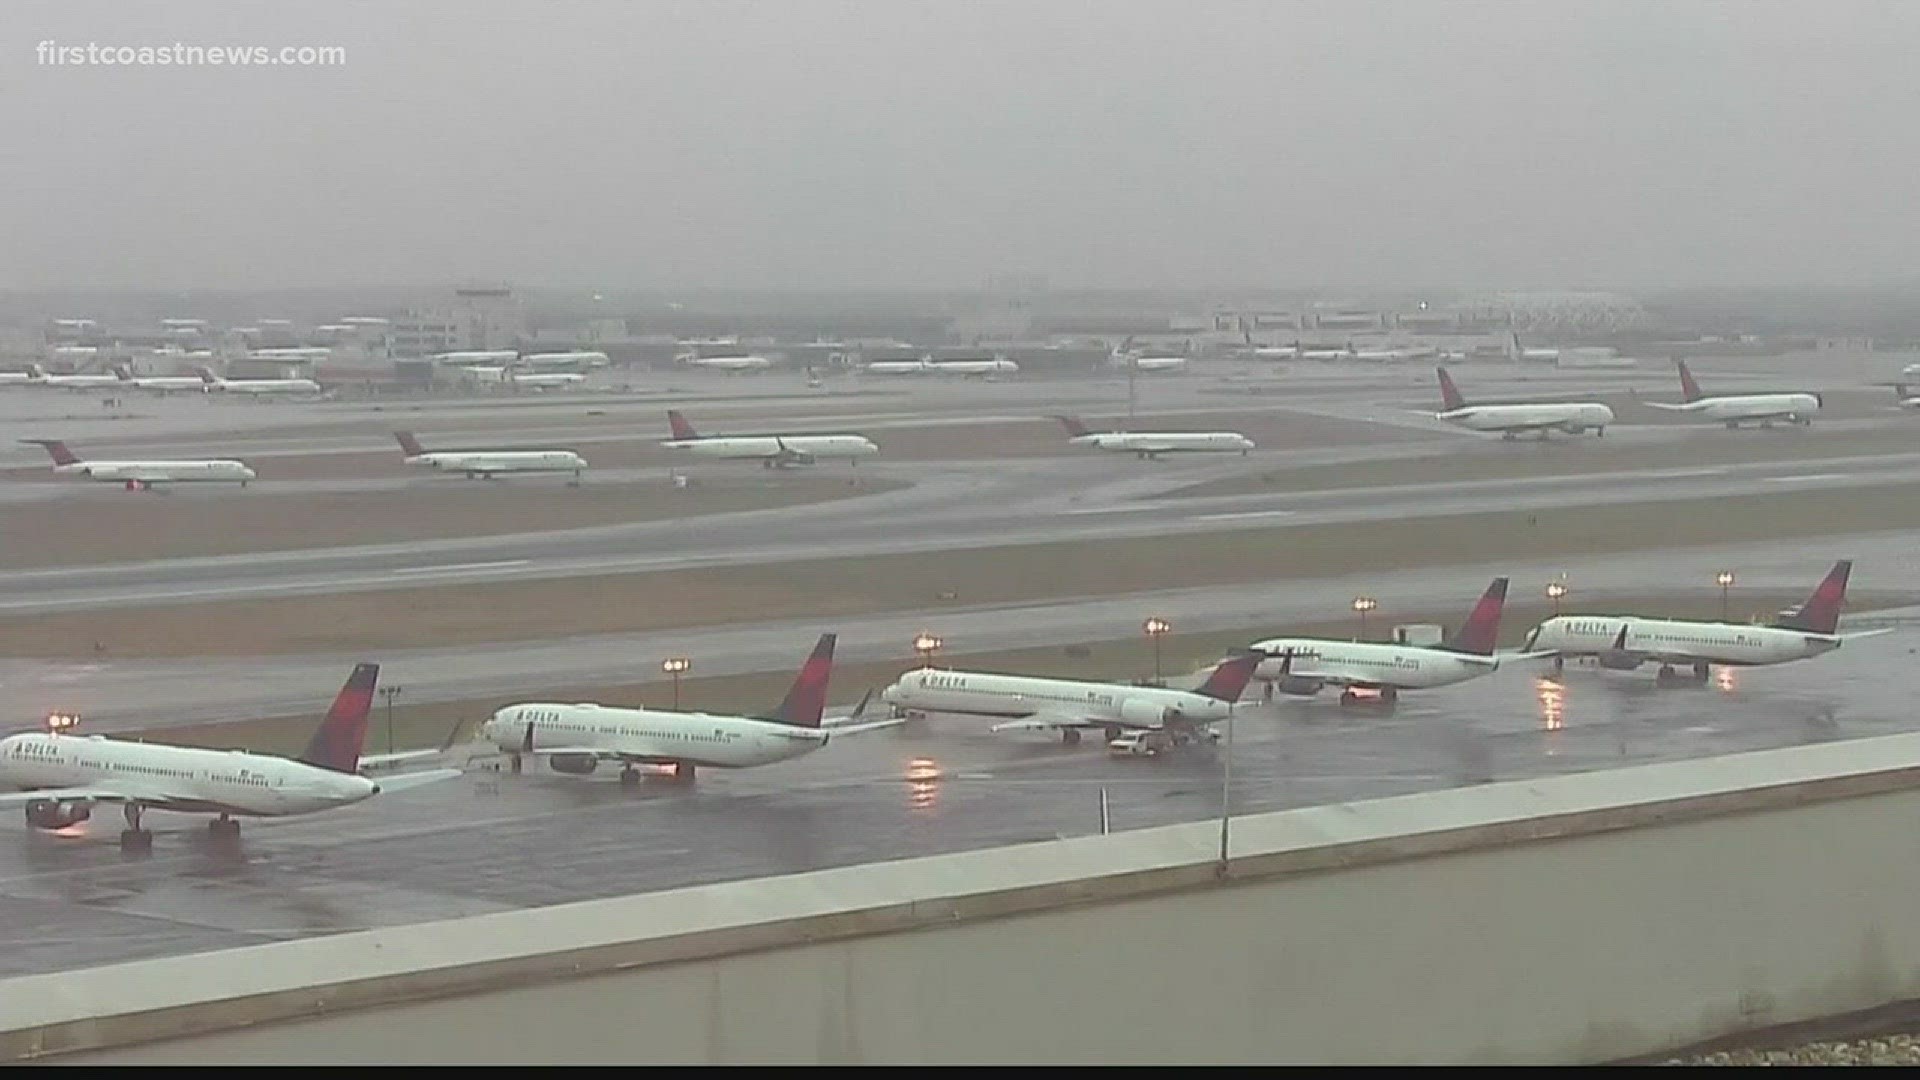 A power outage at Hartsfield-Jackson Atlanta International Airport is causing cancellations across numerous airlines here on the First Coast and across the nation.